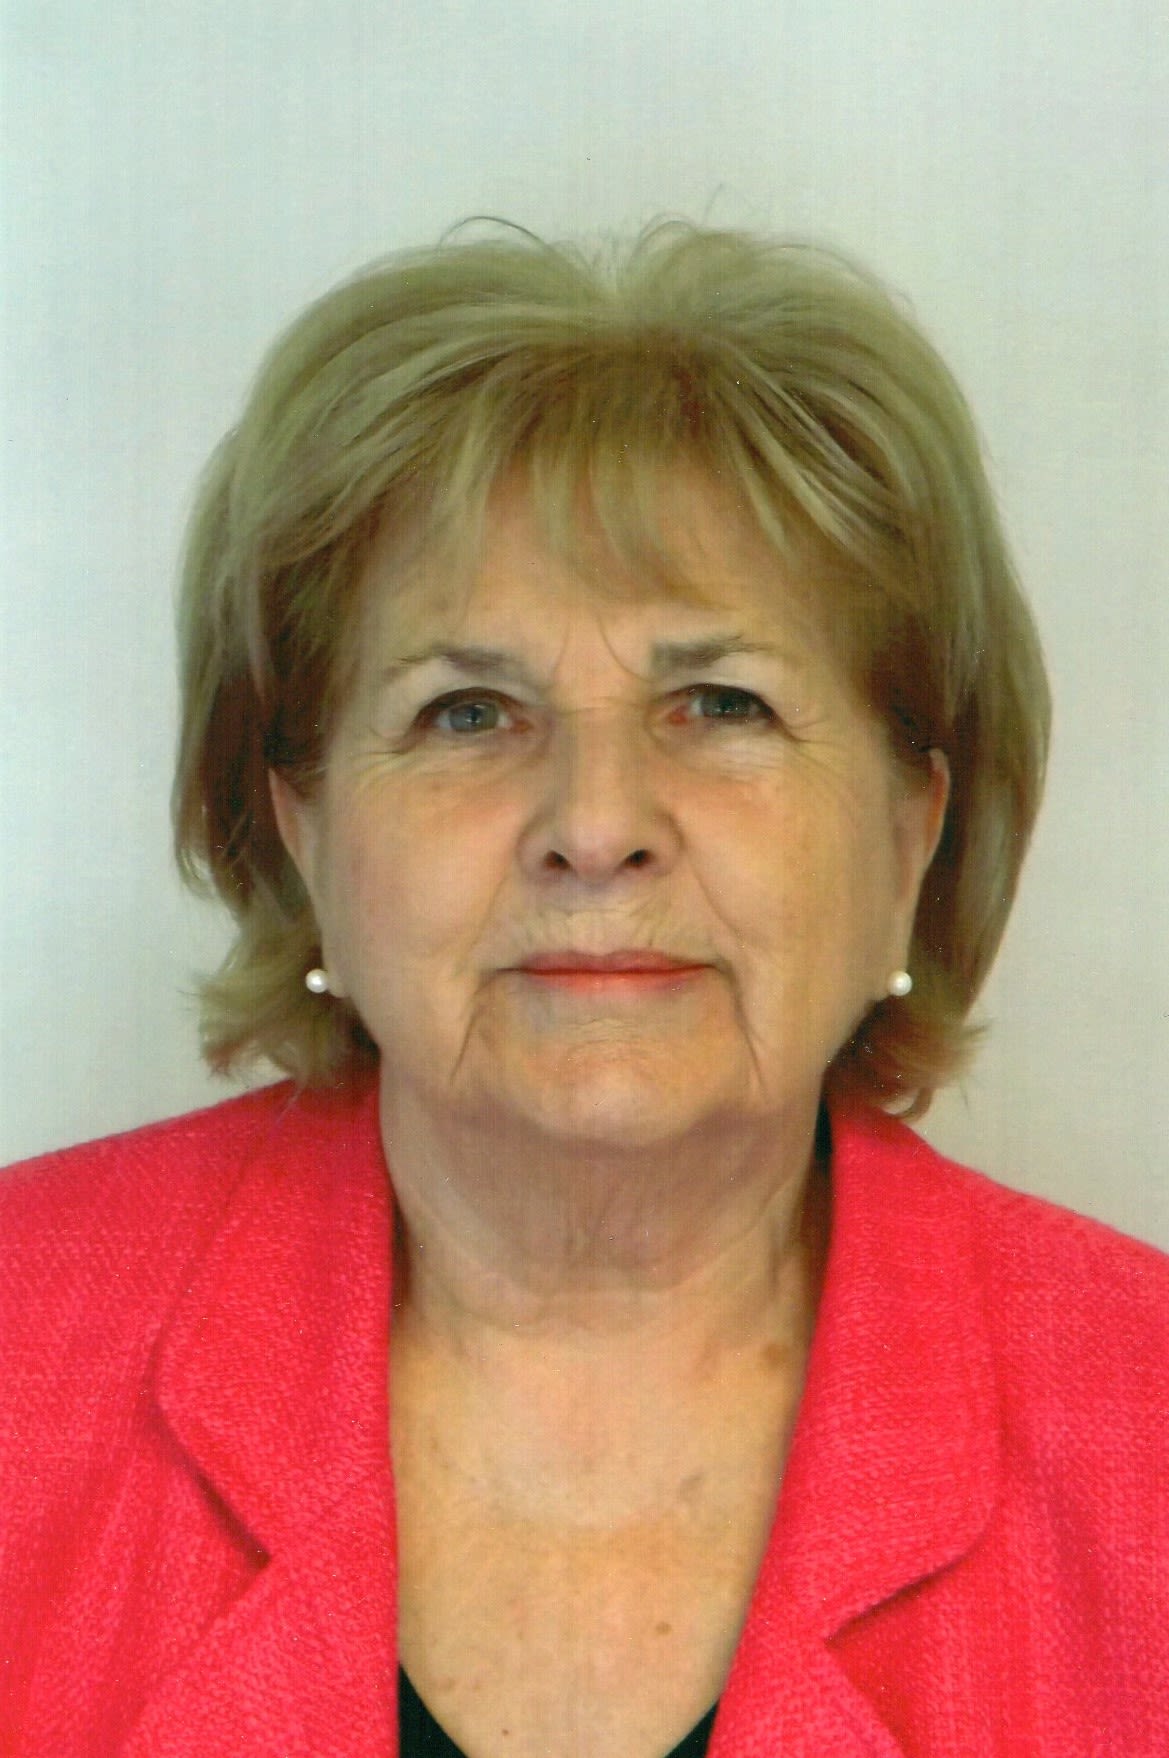 Woman with short blonde hair and a red blazer.